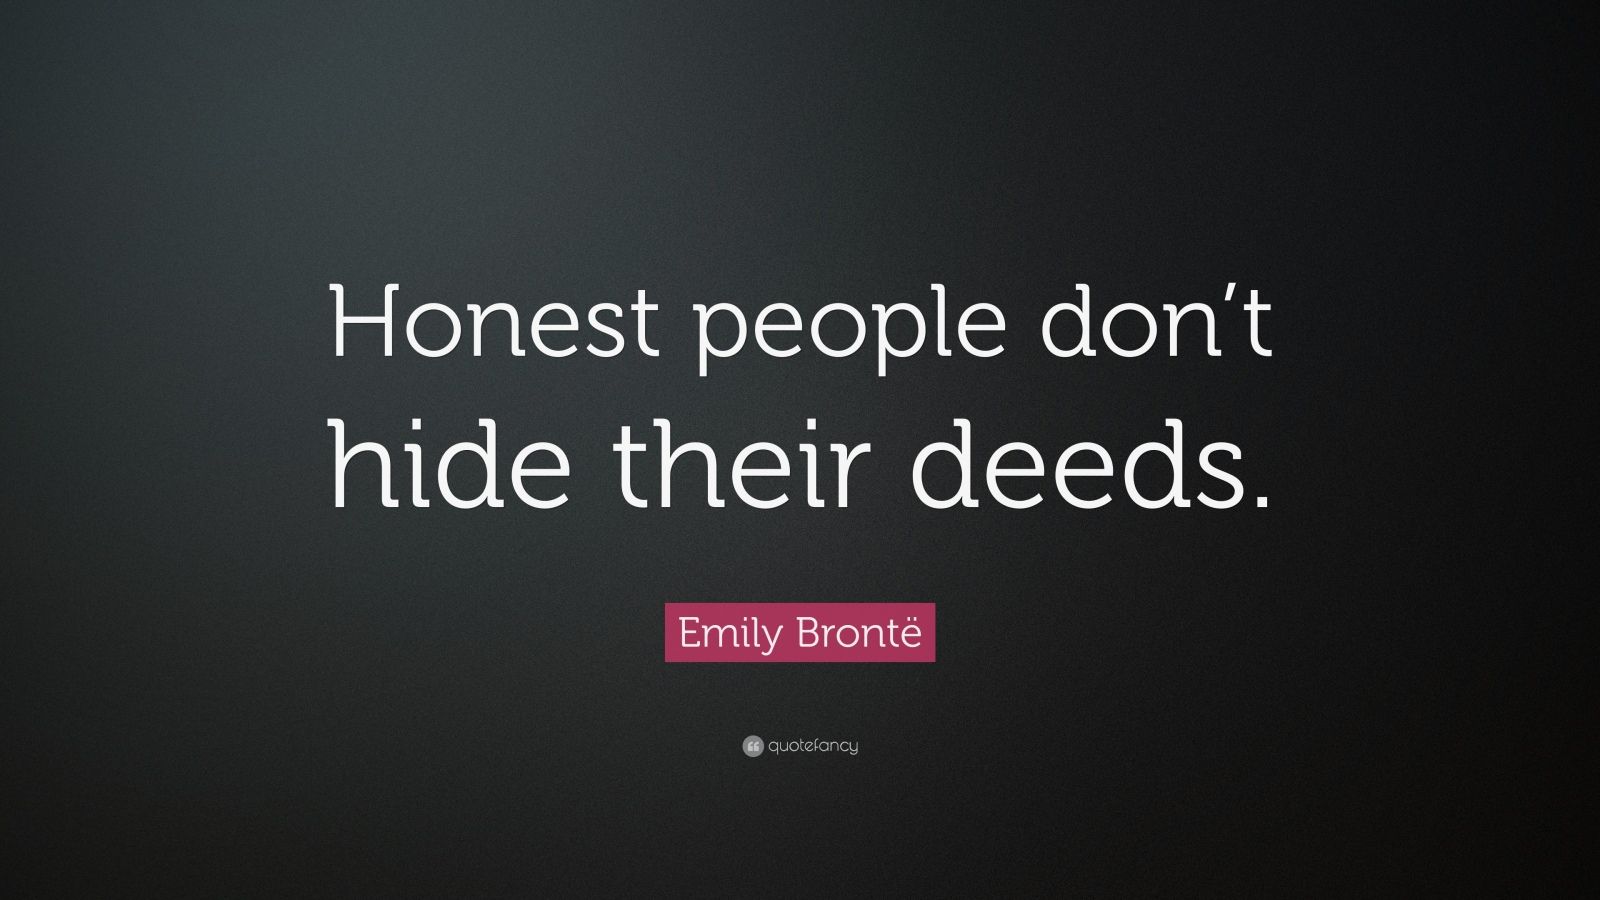 Emily Brontë Quote: “Honest people don’t hide their deeds.”